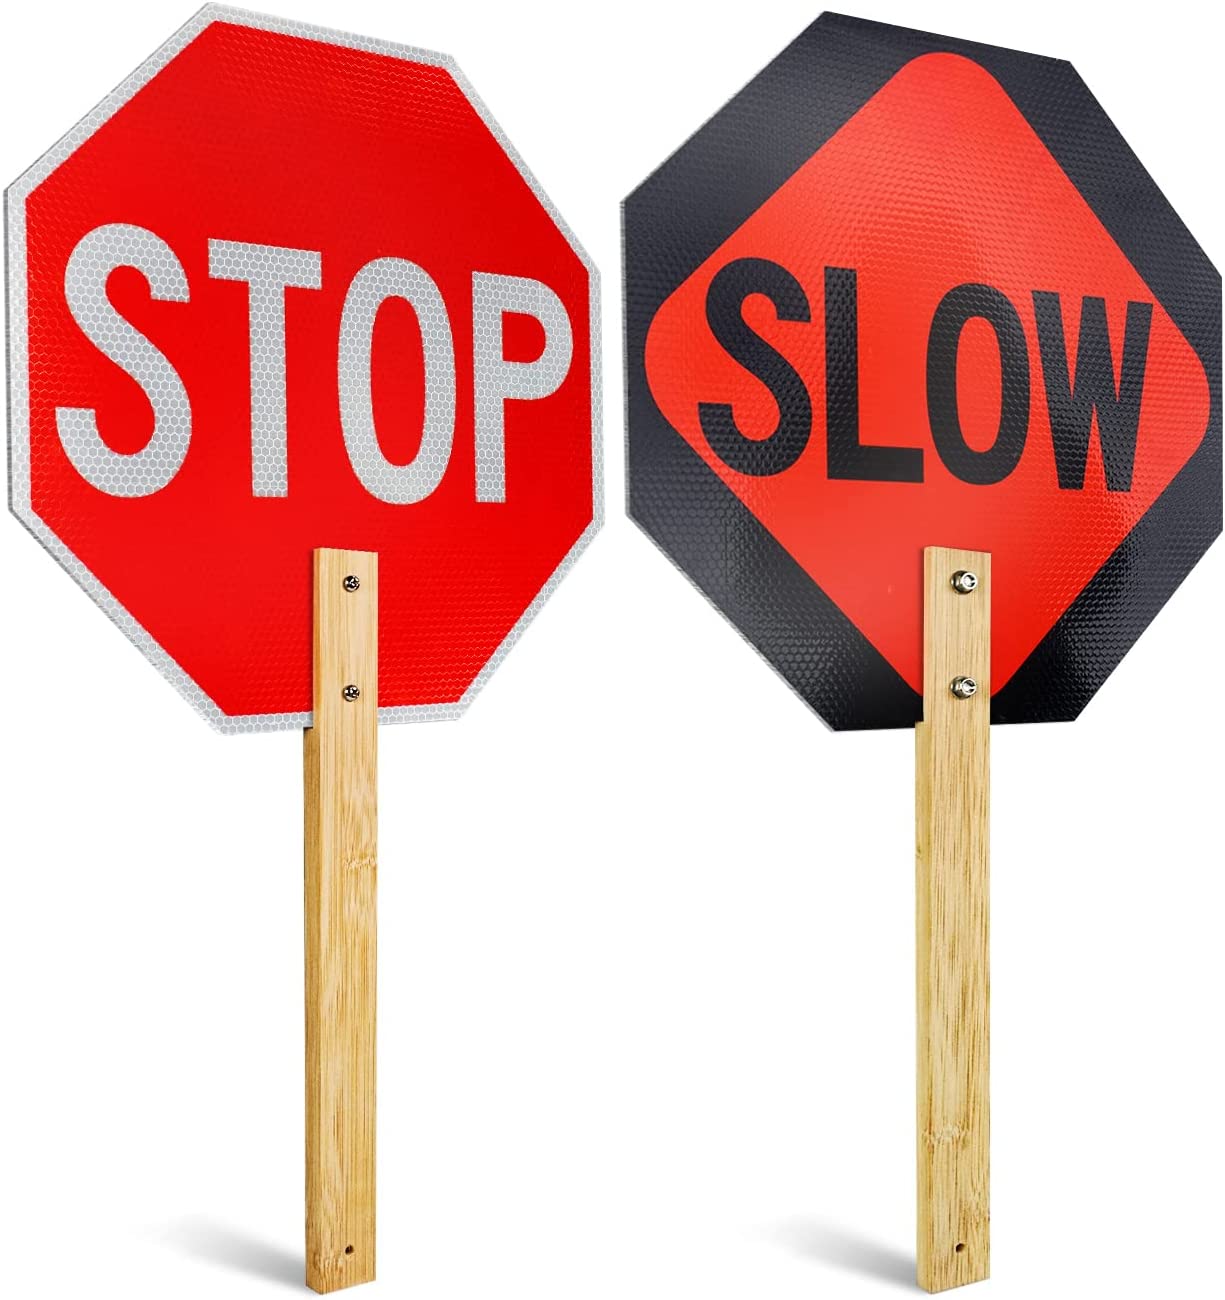 Stop Slow Sign with Bamboo Handle, 13&#34; x 13&#34; Double Sided Engineer Grade Aluminum Sign, Reflective,Sturdy, Easy to Assemble